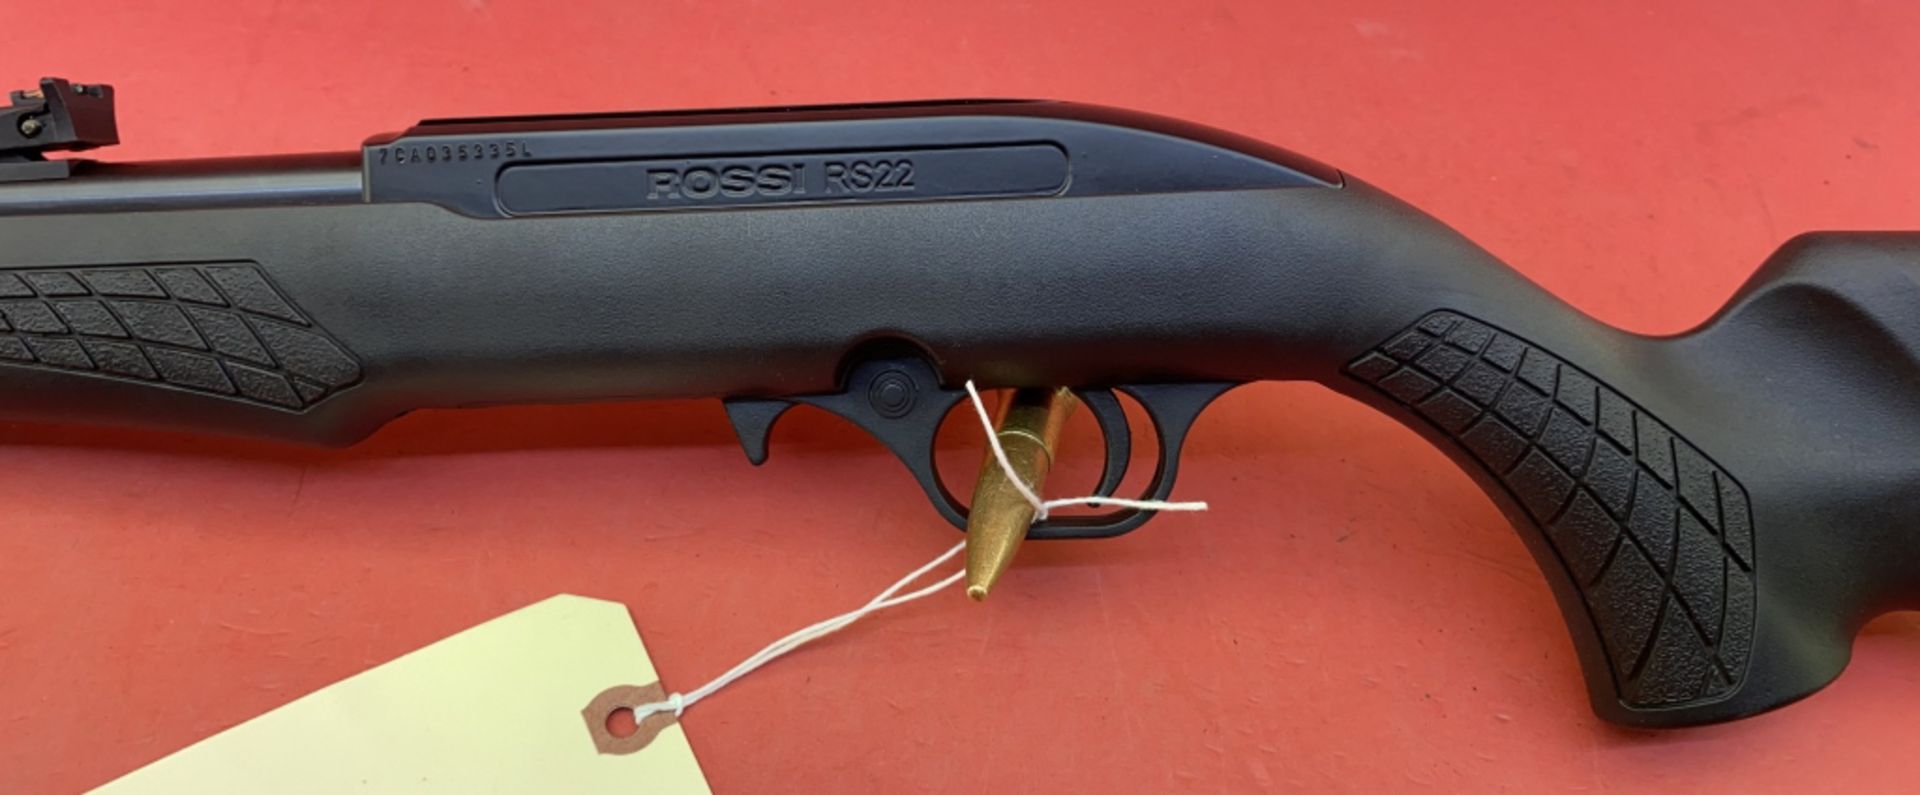 Rossi RS22 .22LR Rifle - Image 8 of 9